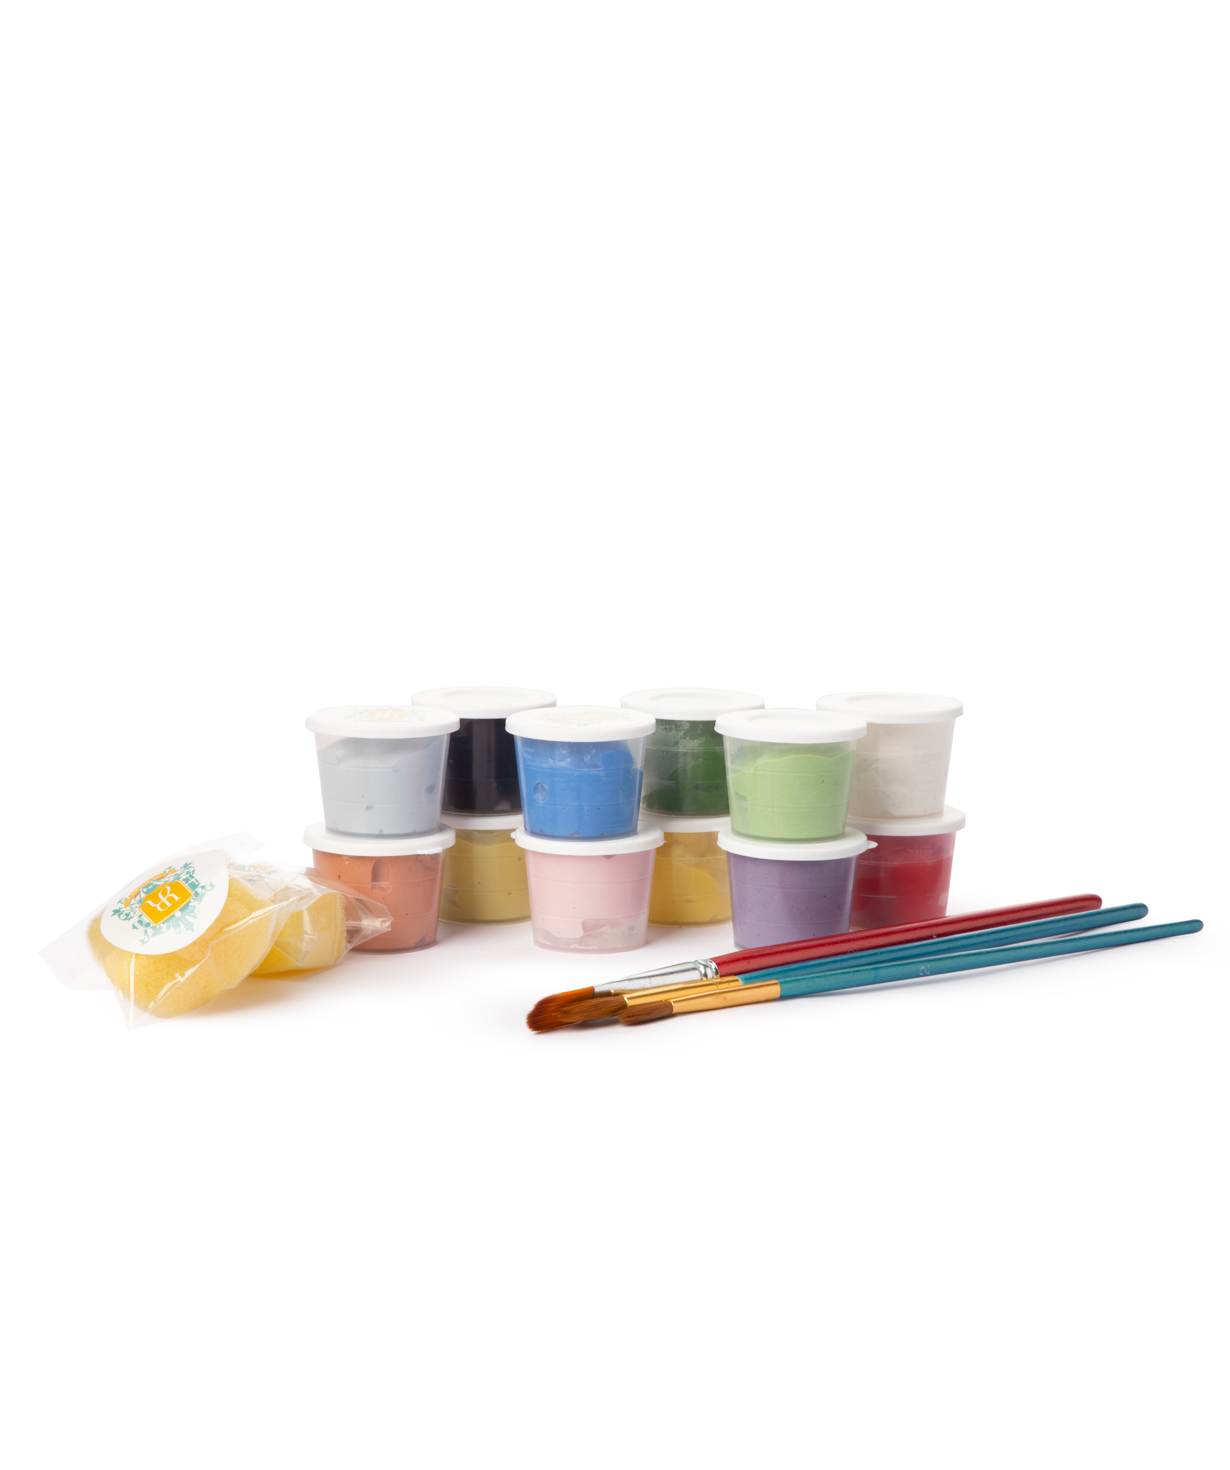 Collection `Yes Republic` art, pasta bowl